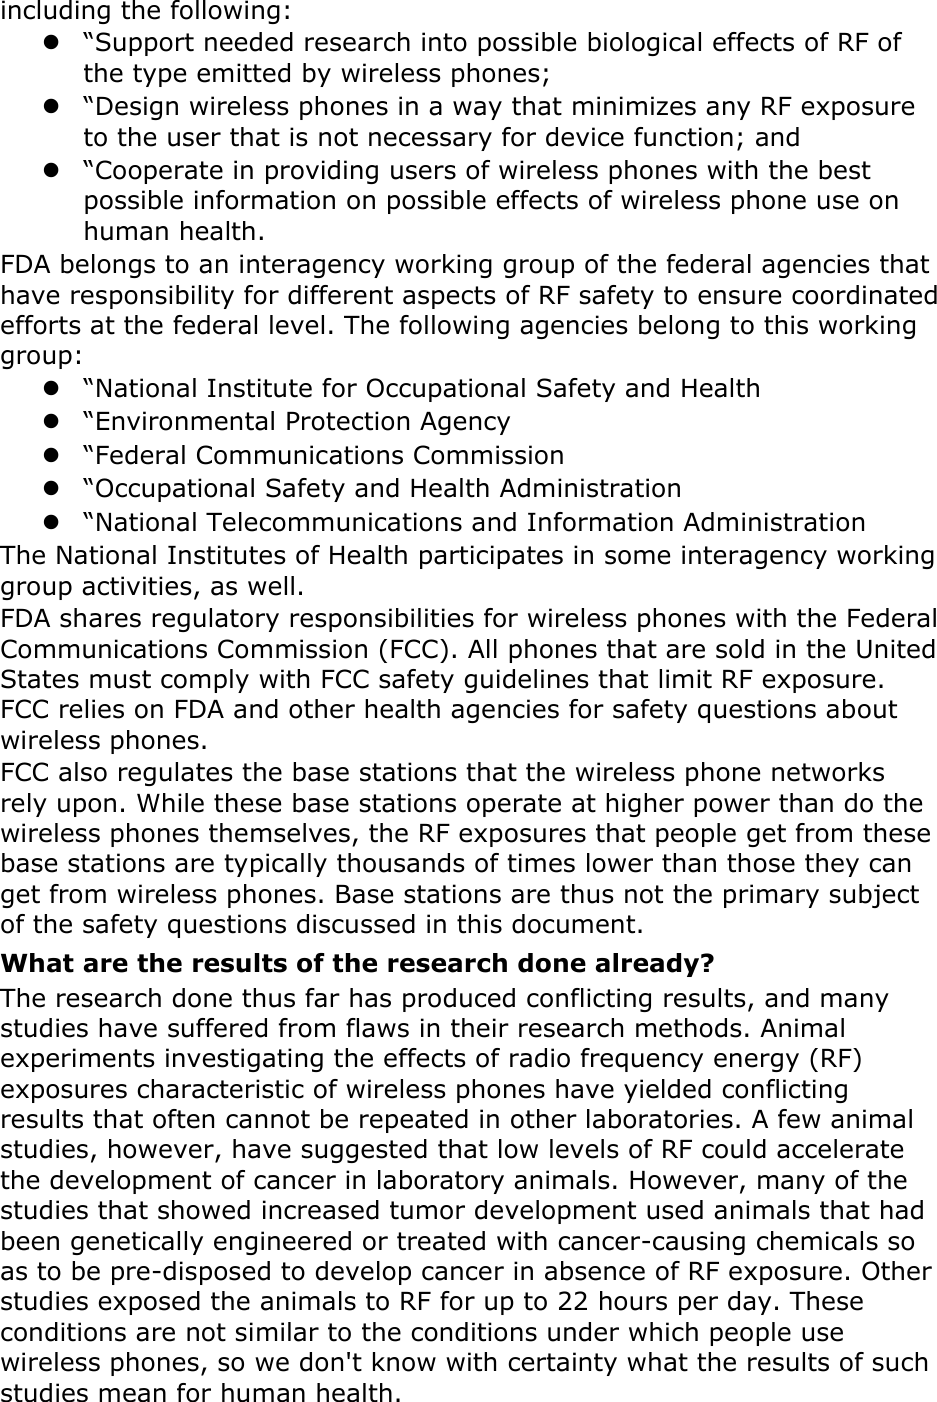 including the following:  “Support needed research into possible biological effects of RF of the type emitted by wireless phones;  “Design wireless phones in a way that minimizes any RF exposure to the user that is not necessary for device function; and  “Cooperate in providing users of wireless phones with the best possible information on possible effects of wireless phone use on human health. FDA belongs to an interagency working group of the federal agencies that have responsibility for different aspects of RF safety to ensure coordinated efforts at the federal level. The following agencies belong to this working group:  “National Institute for Occupational Safety and Health  “Environmental Protection Agency  “Federal Communications Commission  “Occupational Safety and Health Administration  “National Telecommunications and Information Administration The National Institutes of Health participates in some interagency working group activities, as well. FDA shares regulatory responsibilities for wireless phones with the Federal Communications Commission (FCC). All phones that are sold in the United States must comply with FCC safety guidelines that limit RF exposure. FCC relies on FDA and other health agencies for safety questions about wireless phones. FCC also regulates the base stations that the wireless phone networks rely upon. While these base stations operate at higher power than do the wireless phones themselves, the RF exposures that people get from these base stations are typically thousands of times lower than those they can get from wireless phones. Base stations are thus not the primary subject of the safety questions discussed in this document. What are the results of the research done already? The research done thus far has produced conflicting results, and many studies have suffered from flaws in their research methods. Animal experiments investigating the effects of radio frequency energy (RF) exposures characteristic of wireless phones have yielded conflicting results that often cannot be repeated in other laboratories. A few animal studies, however, have suggested that low levels of RF could accelerate the development of cancer in laboratory animals. However, many of the studies that showed increased tumor development used animals that had been genetically engineered or treated with cancer-causing chemicals so as to be pre-disposed to develop cancer in absence of RF exposure. Other studies exposed the animals to RF for up to 22 hours per day. These conditions are not similar to the conditions under which people use wireless phones, so we don&apos;t know with certainty what the results of such studies mean for human health. 